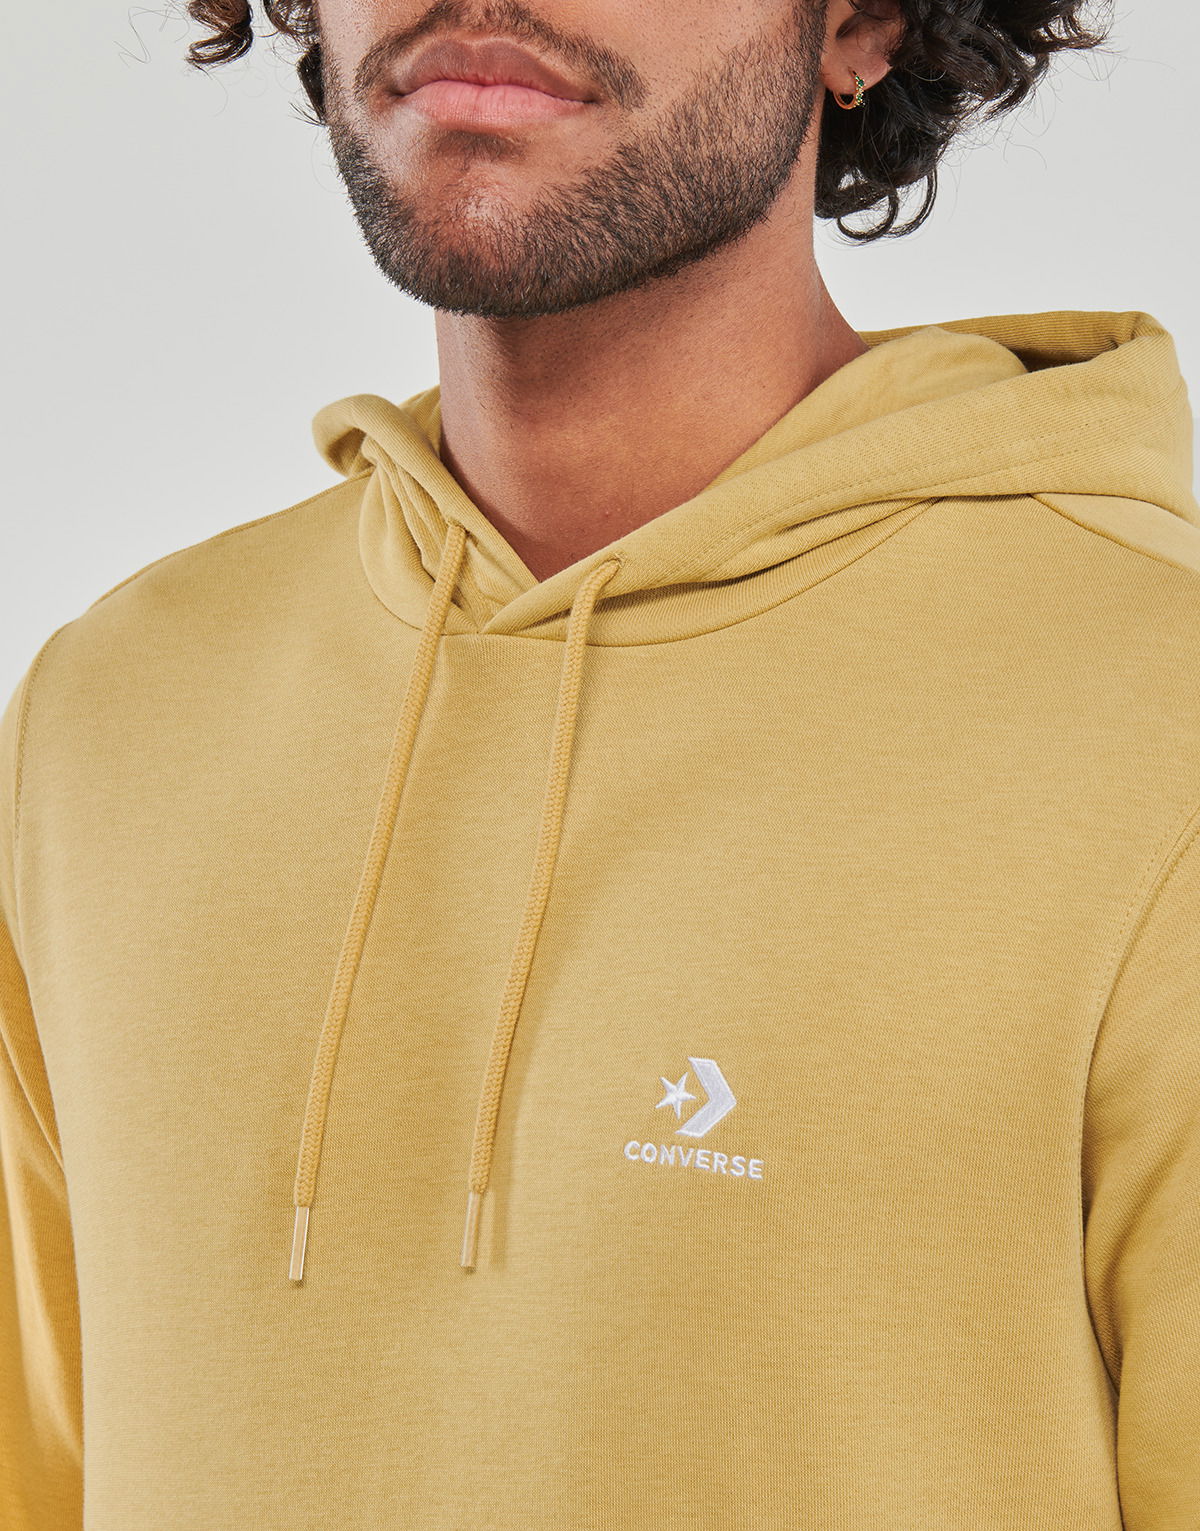 Go-To Embroidered Hoodie